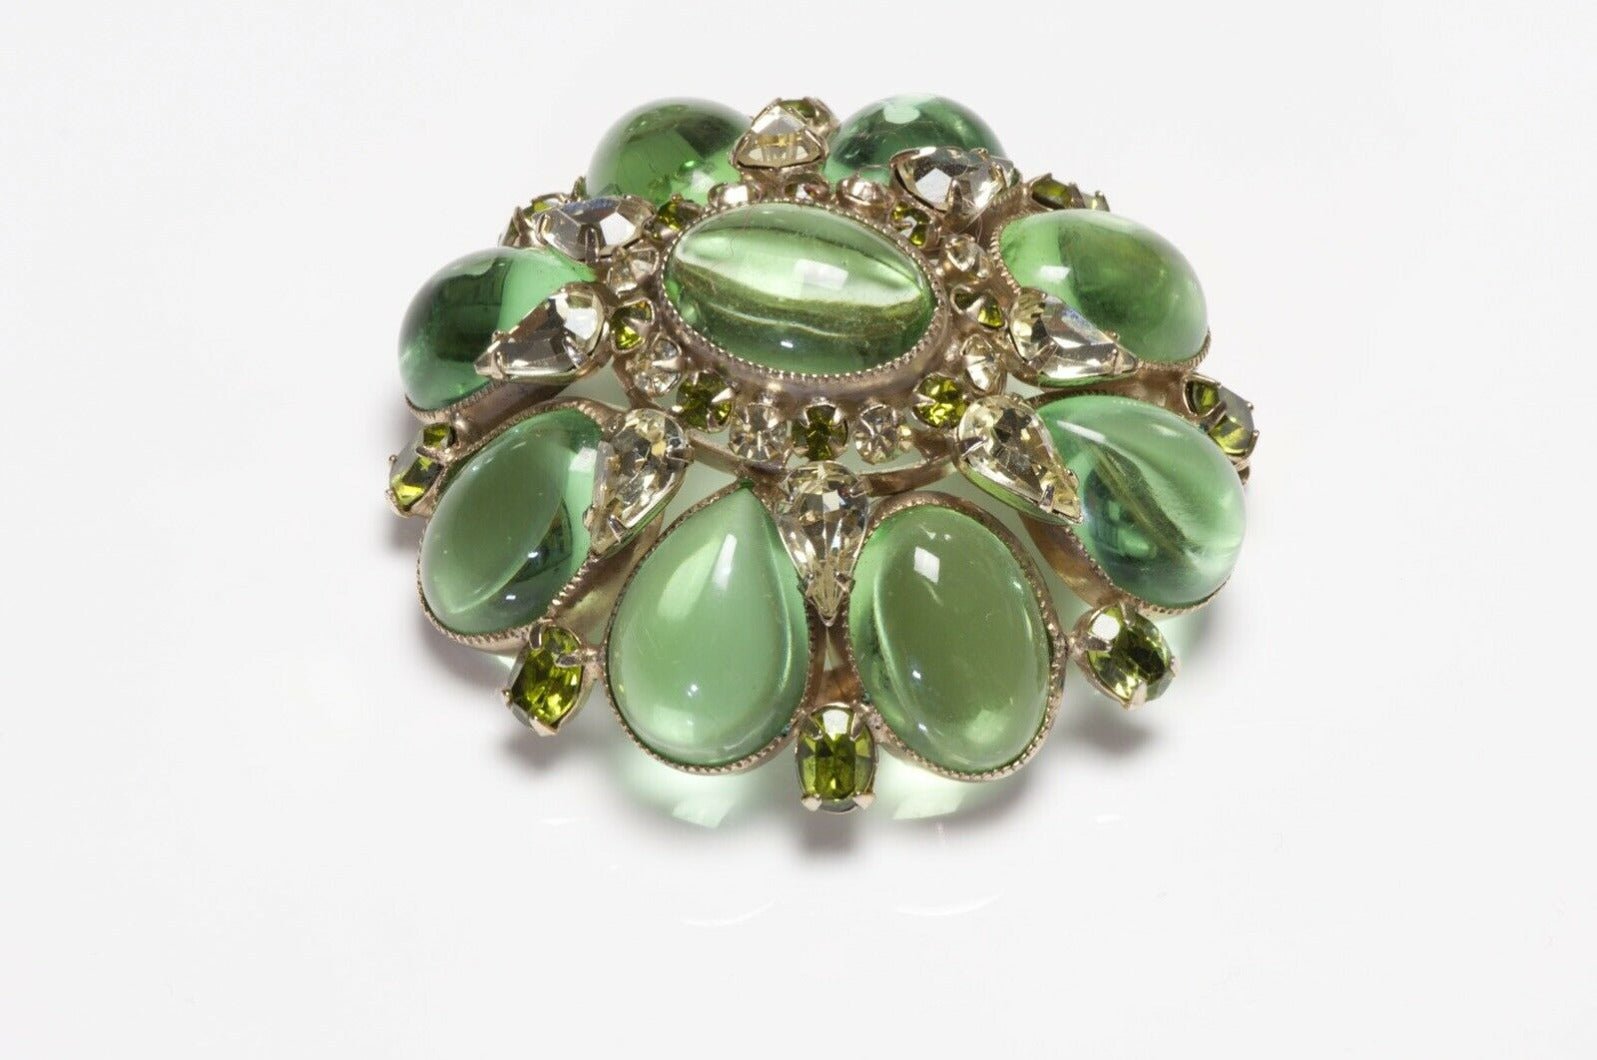 SCHREINER NY Green Cabochon Glass Crystal Brooch Earrings Set